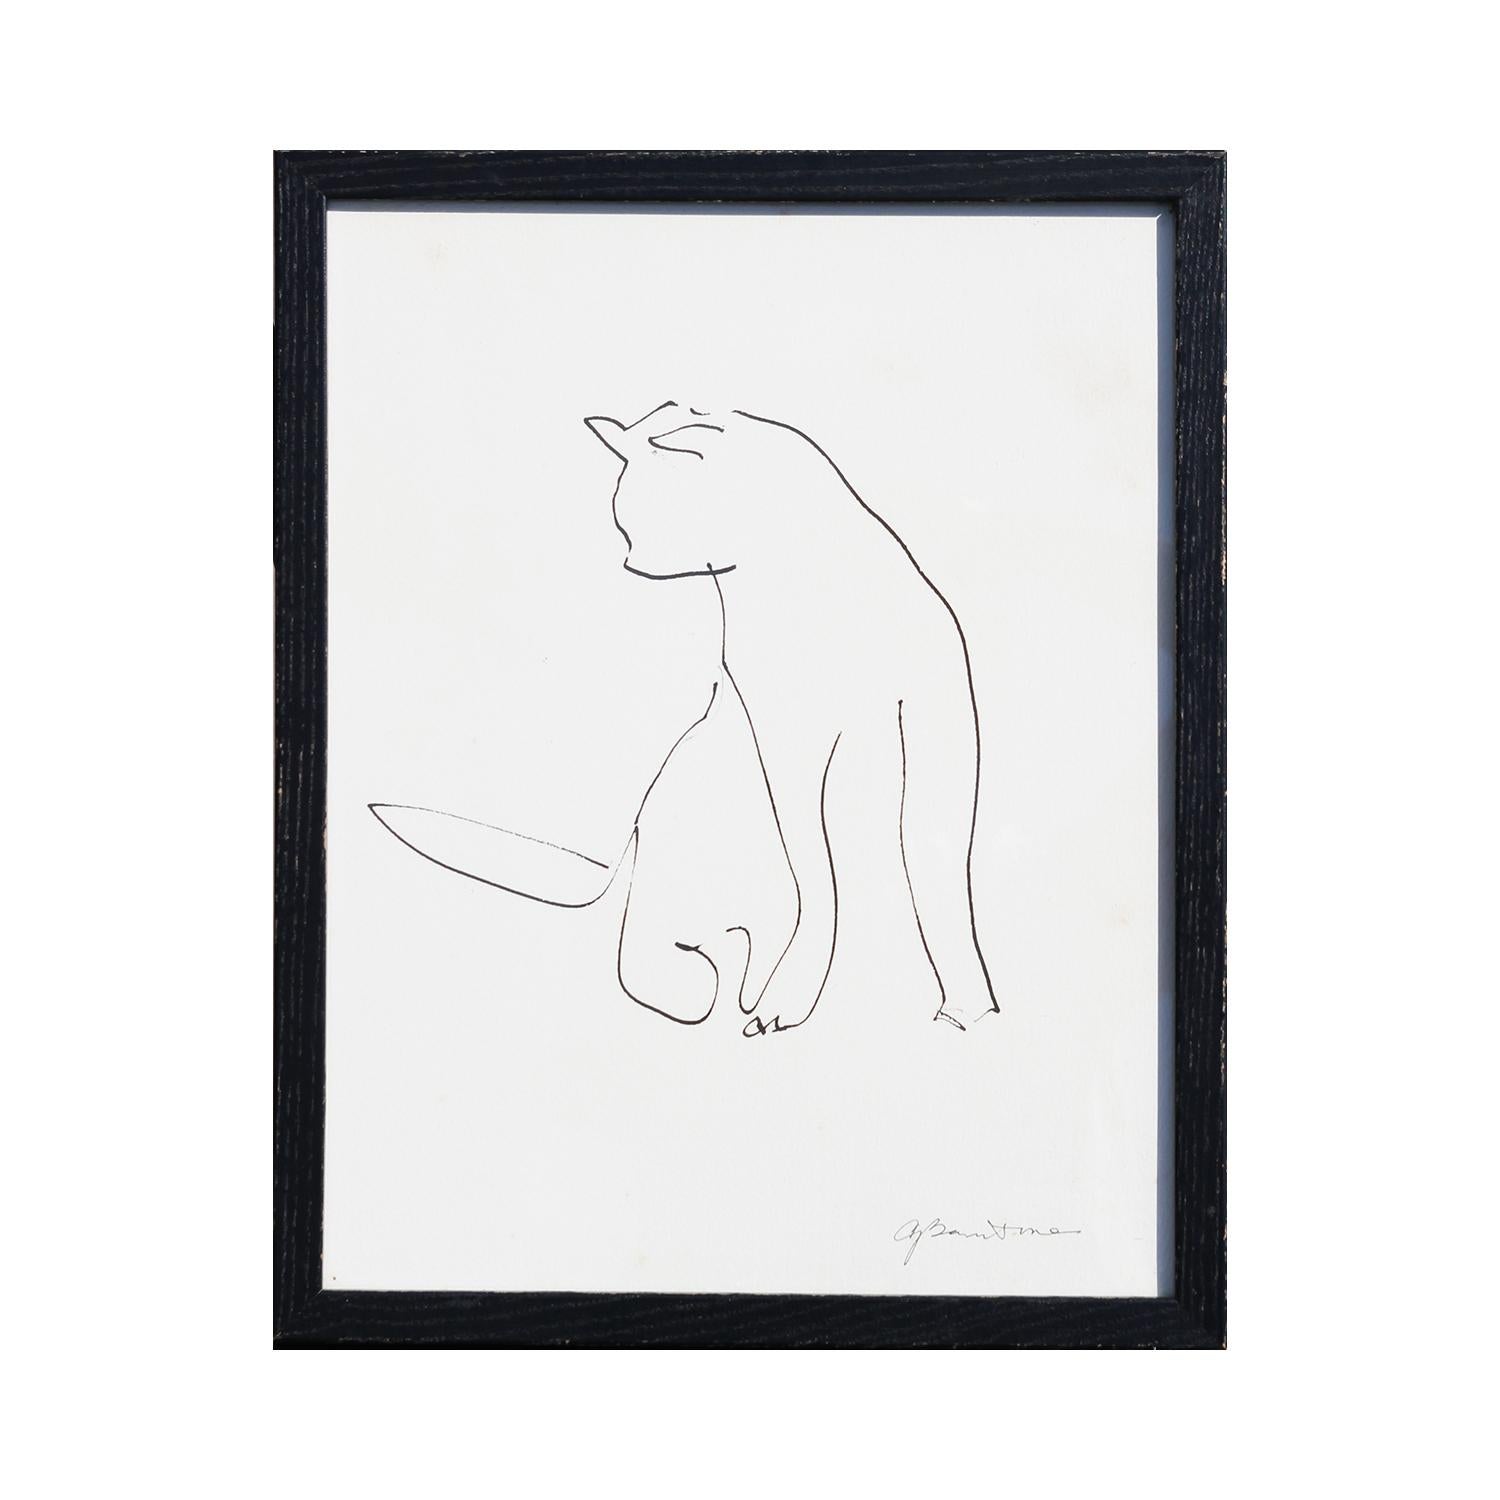 Modern Minimal Pen Contour Line Drawing of an Abstract Sitting Cat - Art by Gertrude Barnstone